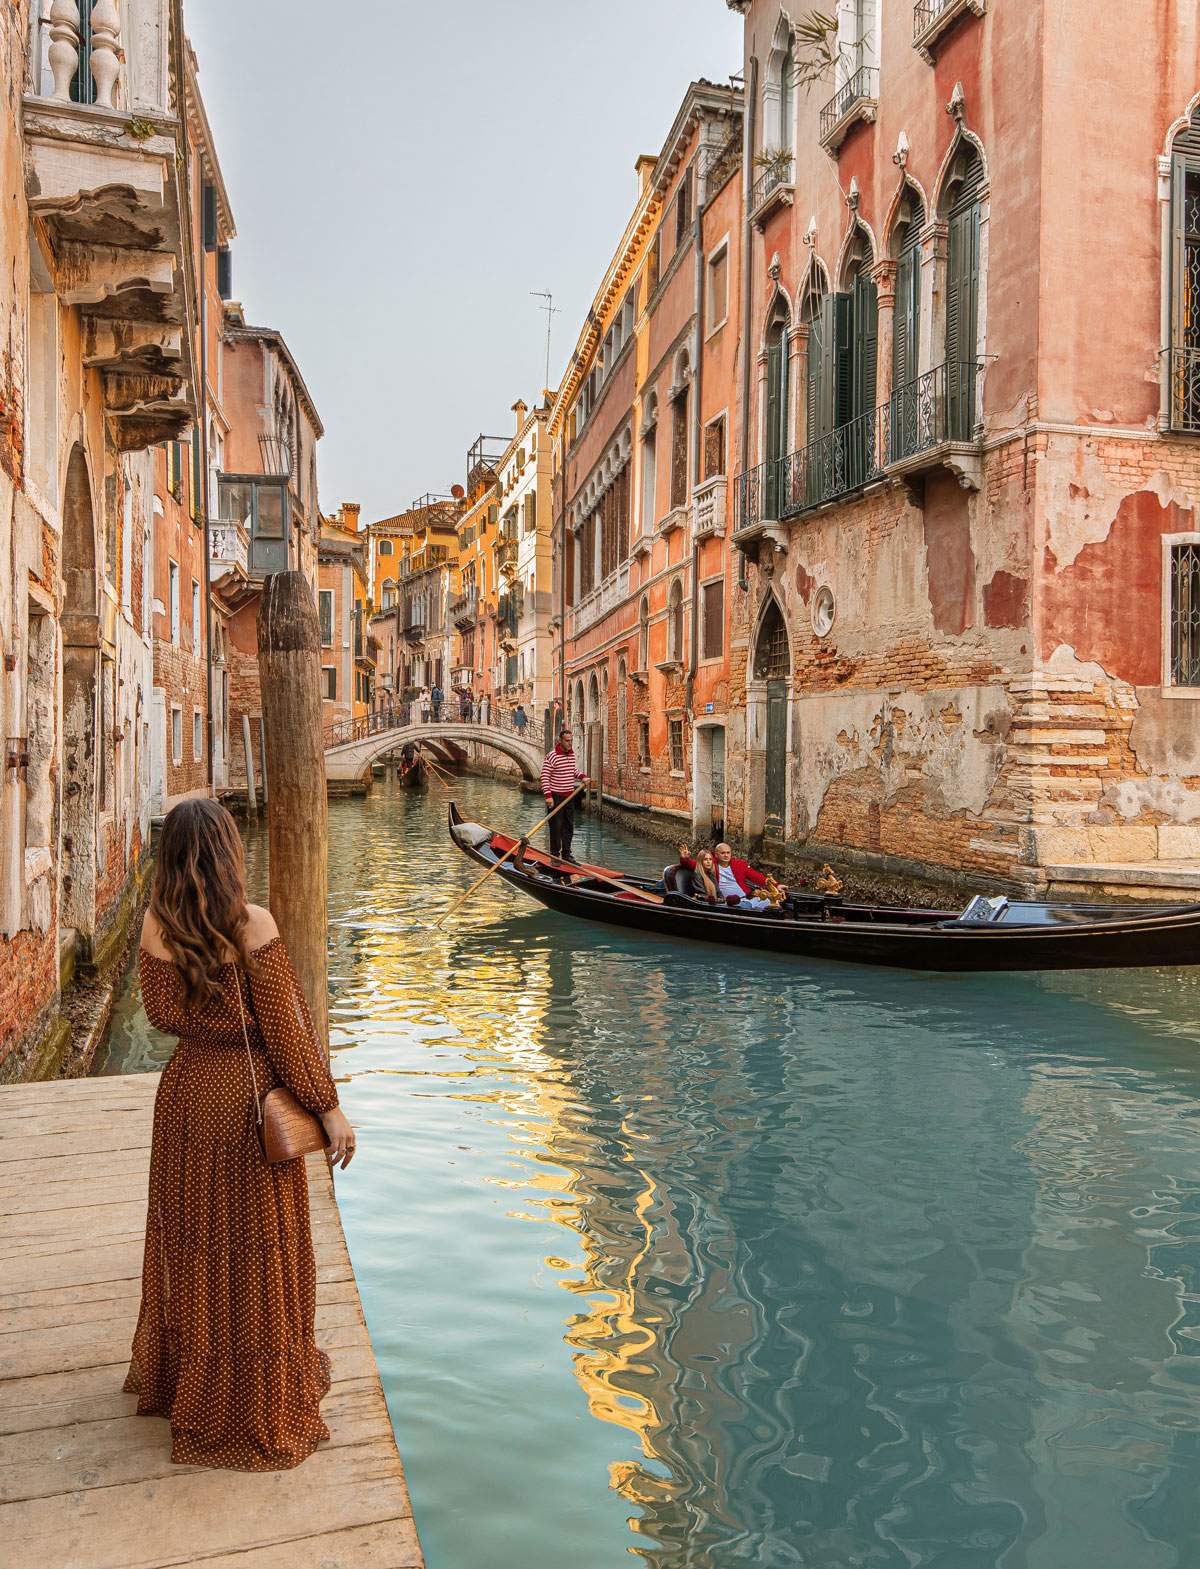 Kelsey standing next to canal in venice as a gondola floats by